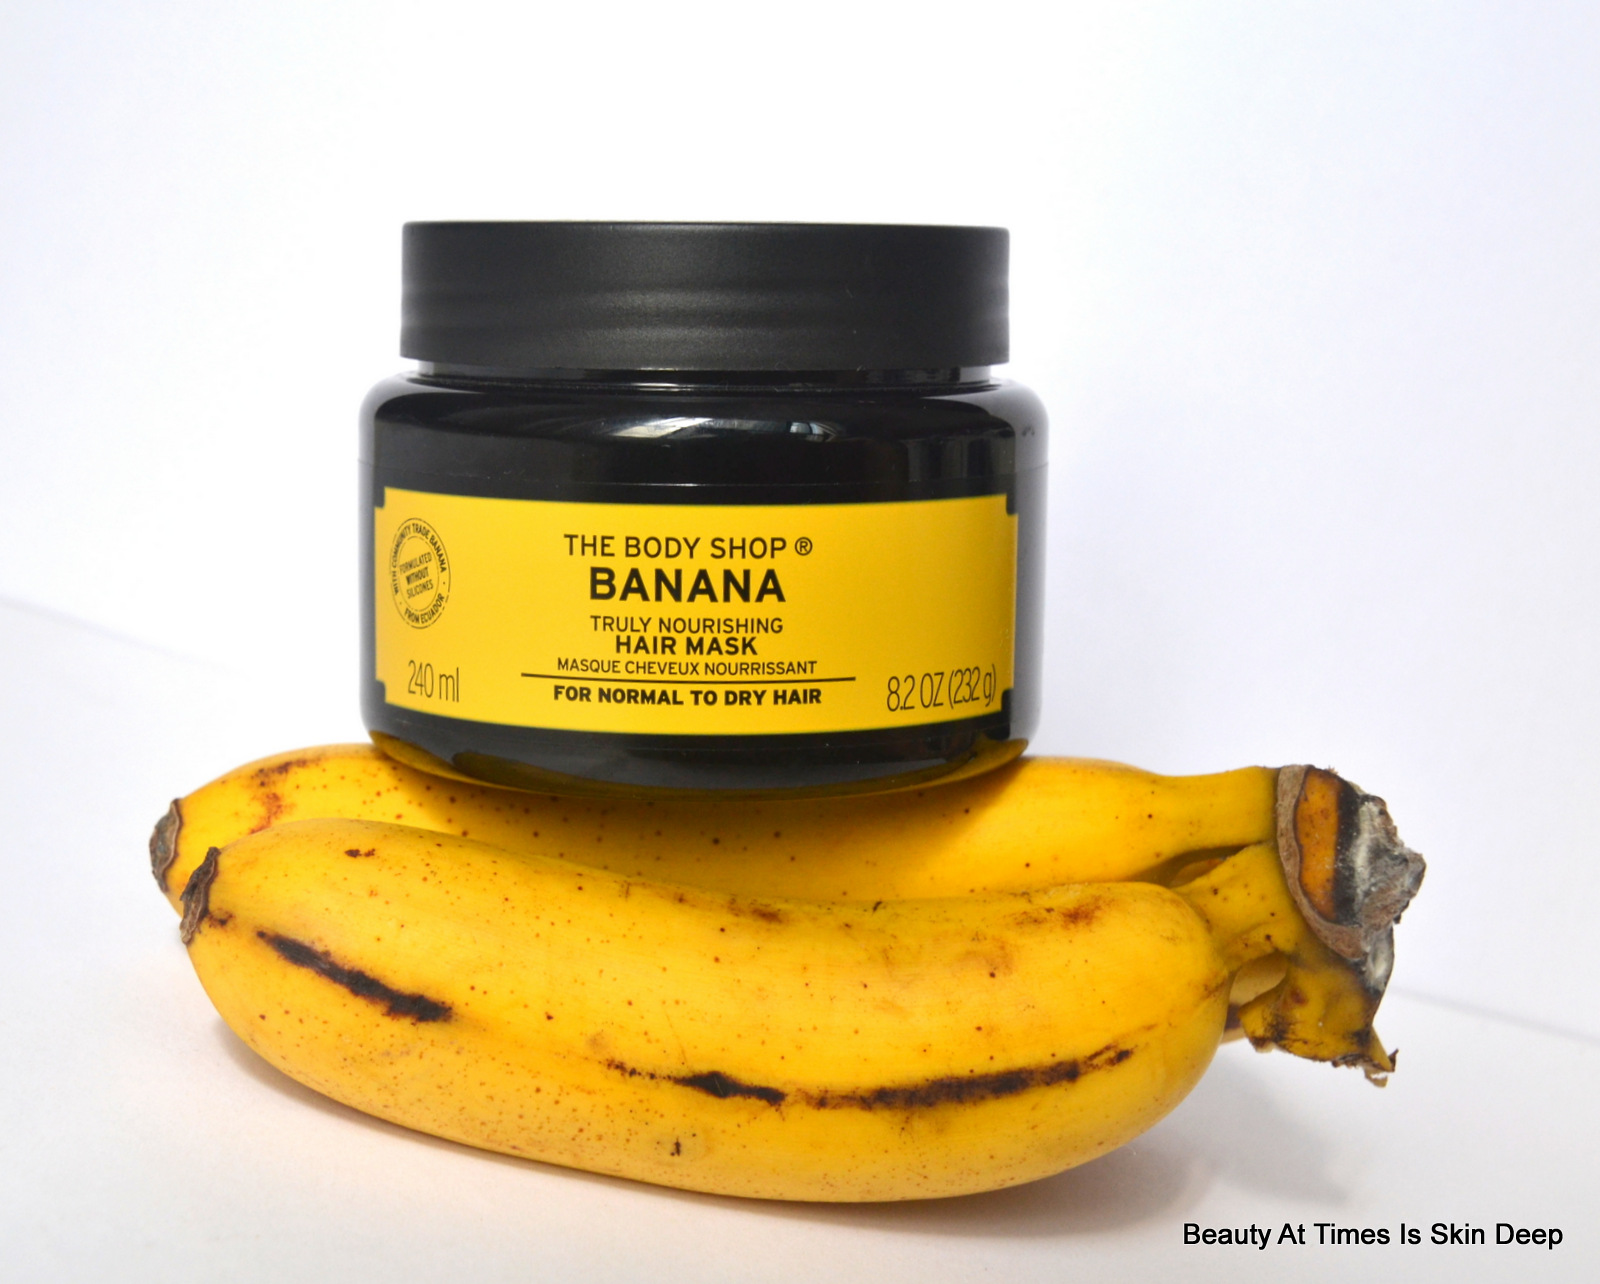 en anden udstilling status Beauty At Times is Skin Deep: The Body Shop Truly Nourishing Banana Hair  Mask for normal to dry hair